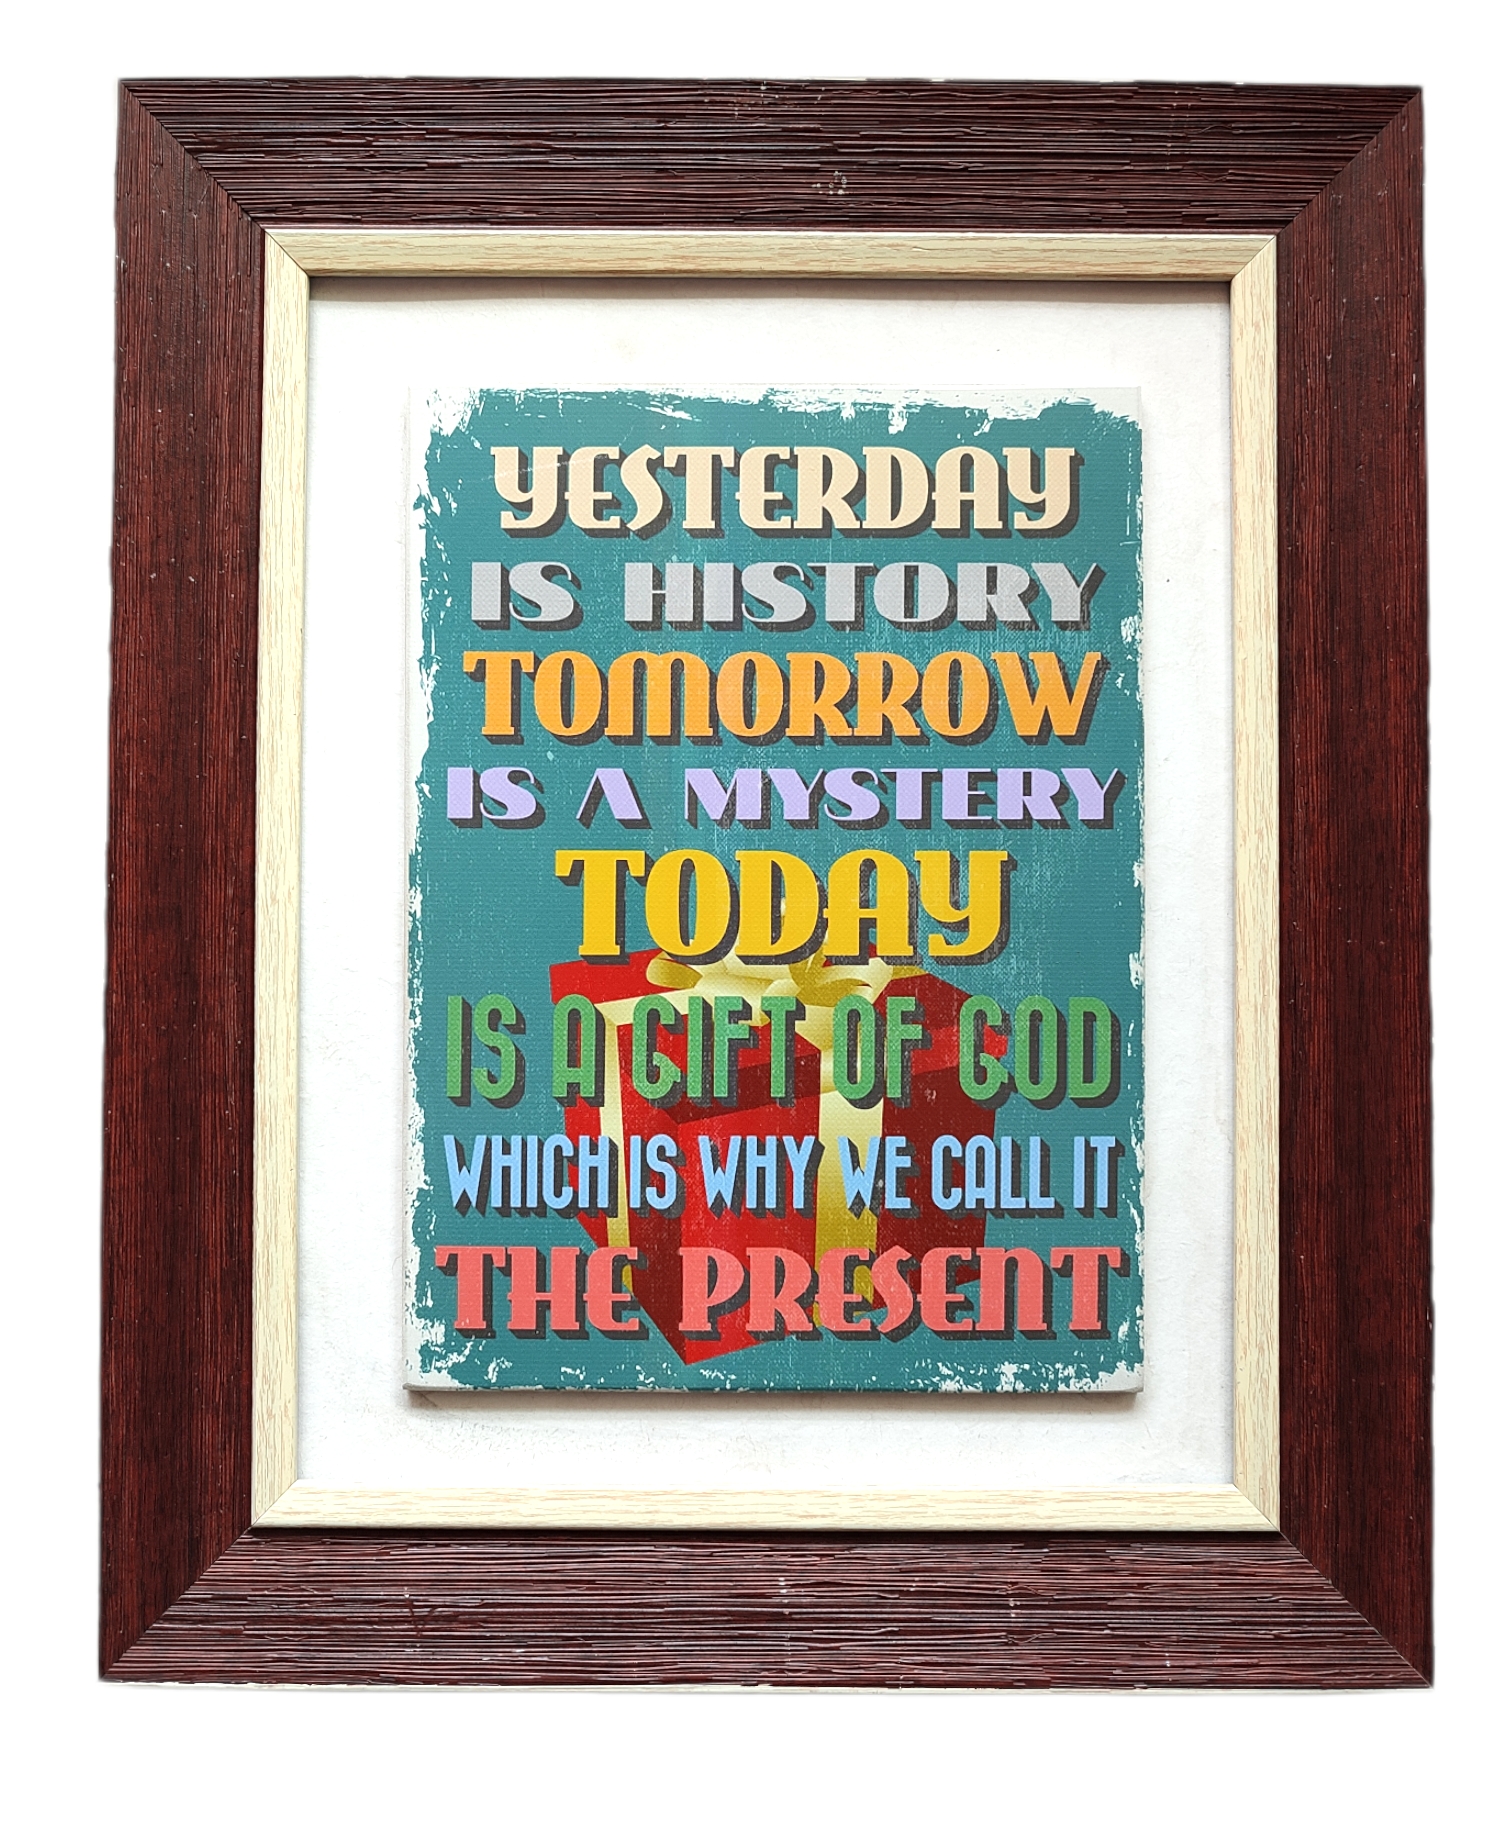 pnf 1237-MOTIVATIONAL QUOTES ysterday is history tomorrow is mystery today  is a gift with Wooden Synthetic Frame Digital Reprint 13 inch x 13 inch  Painting Price in India - Buy pnf 1237-MOTIVATIONAL